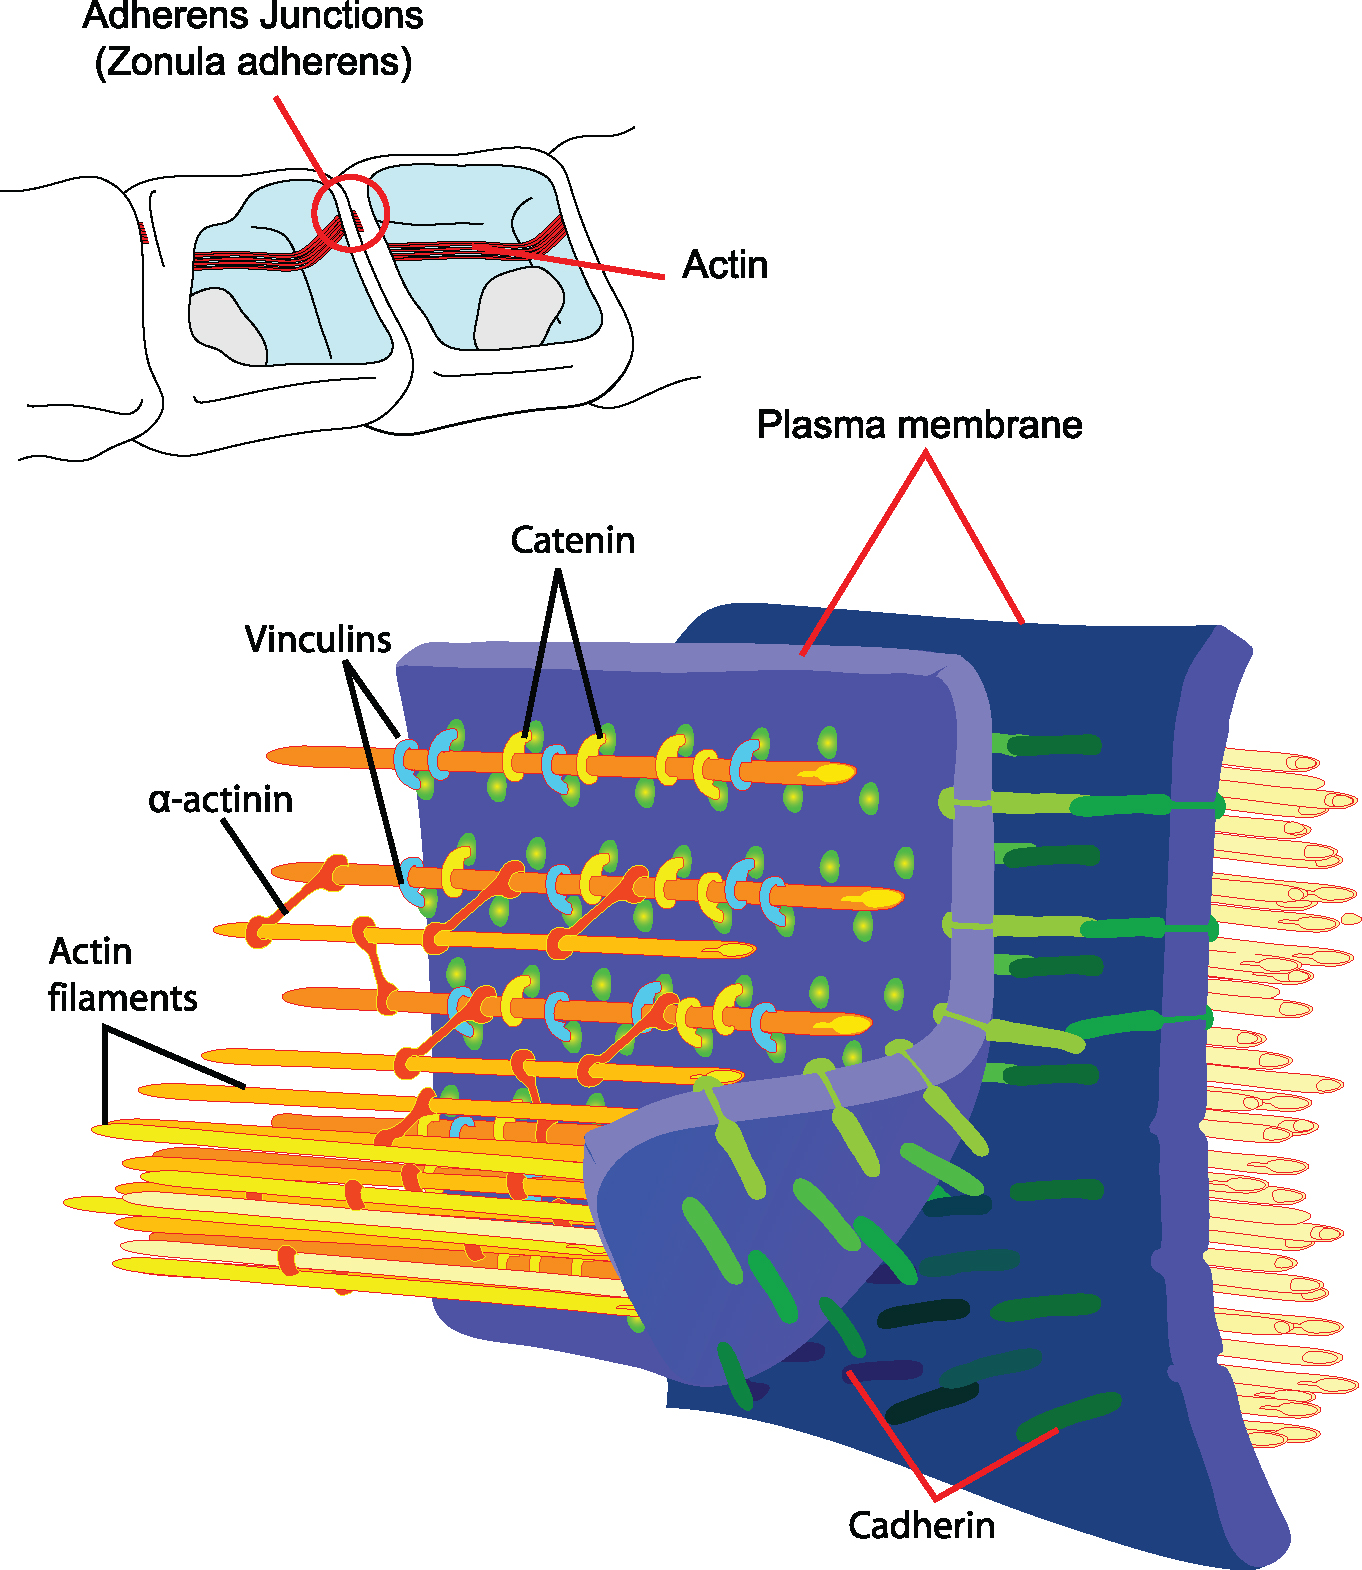 This illustration is two drawings of the principal interactions of structural proteins at a cadherin-based adherens junction. There are two pictures: one is a cut-away view of an adherens junctions with the actin filament identified. Actin filaments are associated with adherens junctions in addition to several other actin-binding proteins. The other is an exploded view of two plasma membranes that depict actin filaments as tubes that are joined to one another by bonds of a-actinin, and then joined to the plasma membrane by catenin and vinculins. The plasma membranes are joined together by cadherin protein.